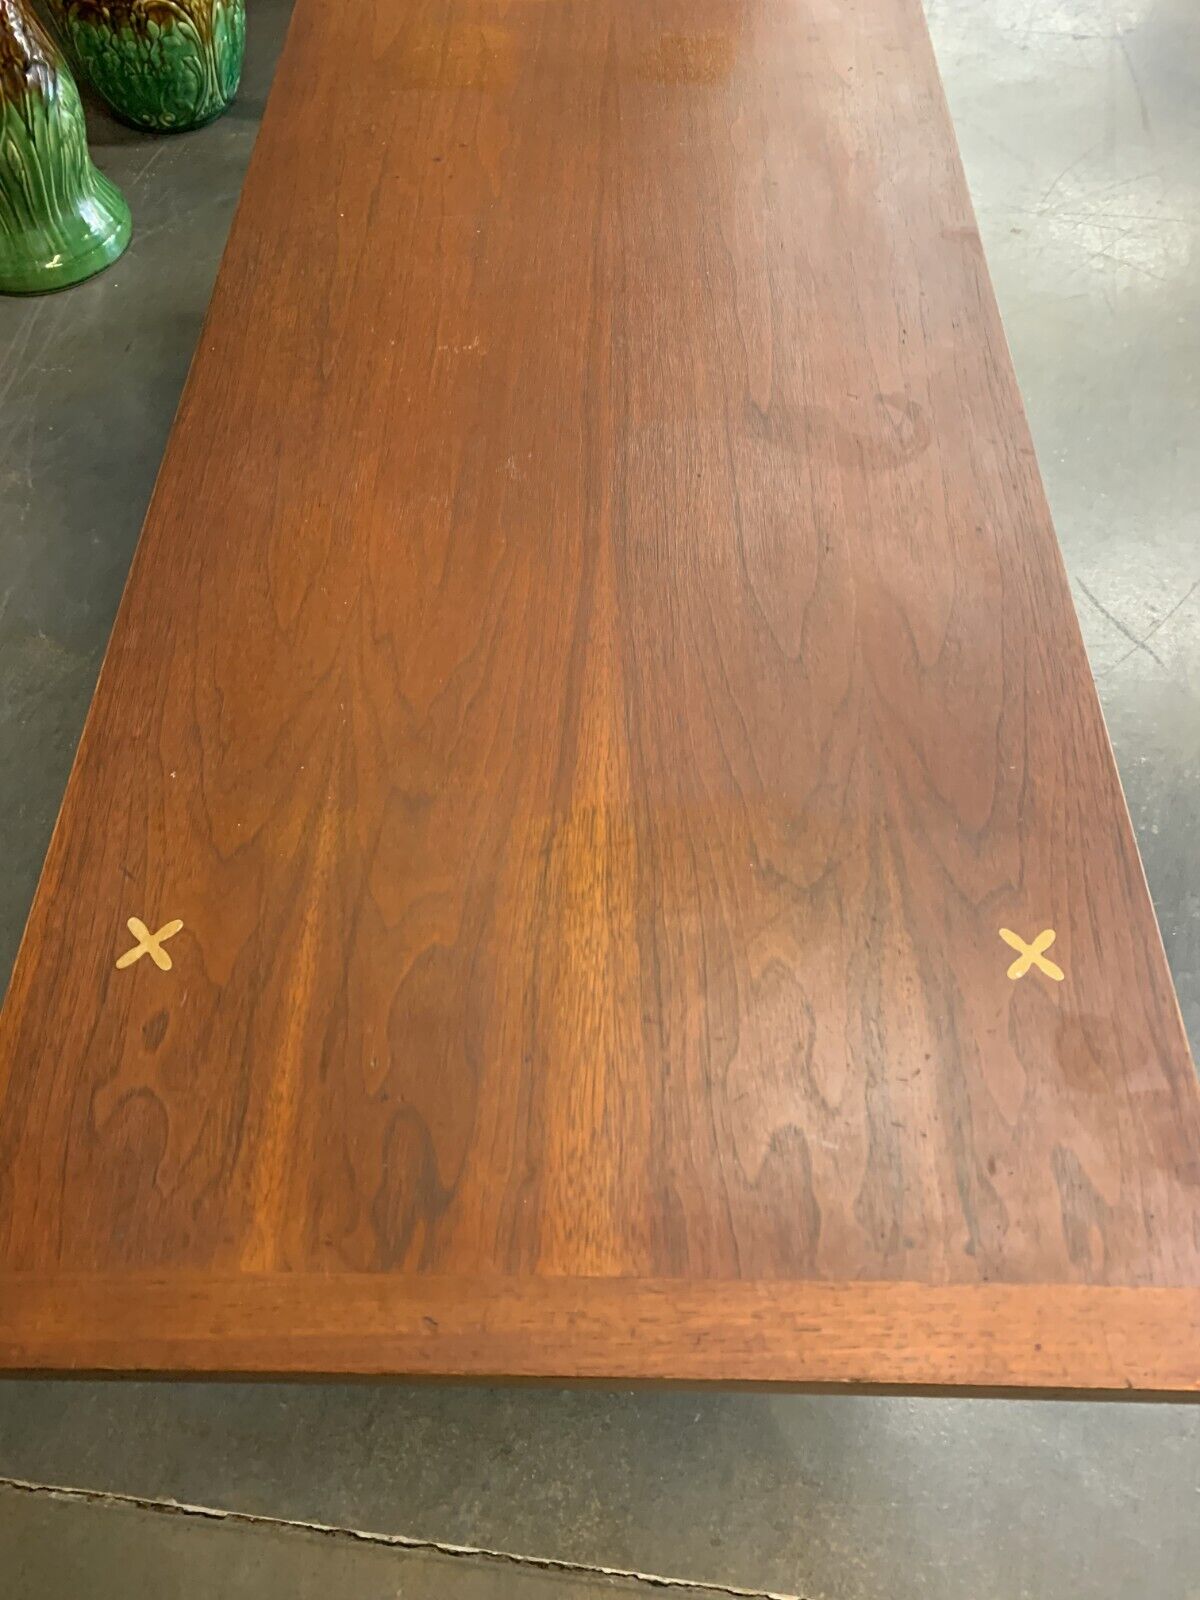 Merton Gershun for American of Martinsville X Inlaid Mid Century Coffee Table